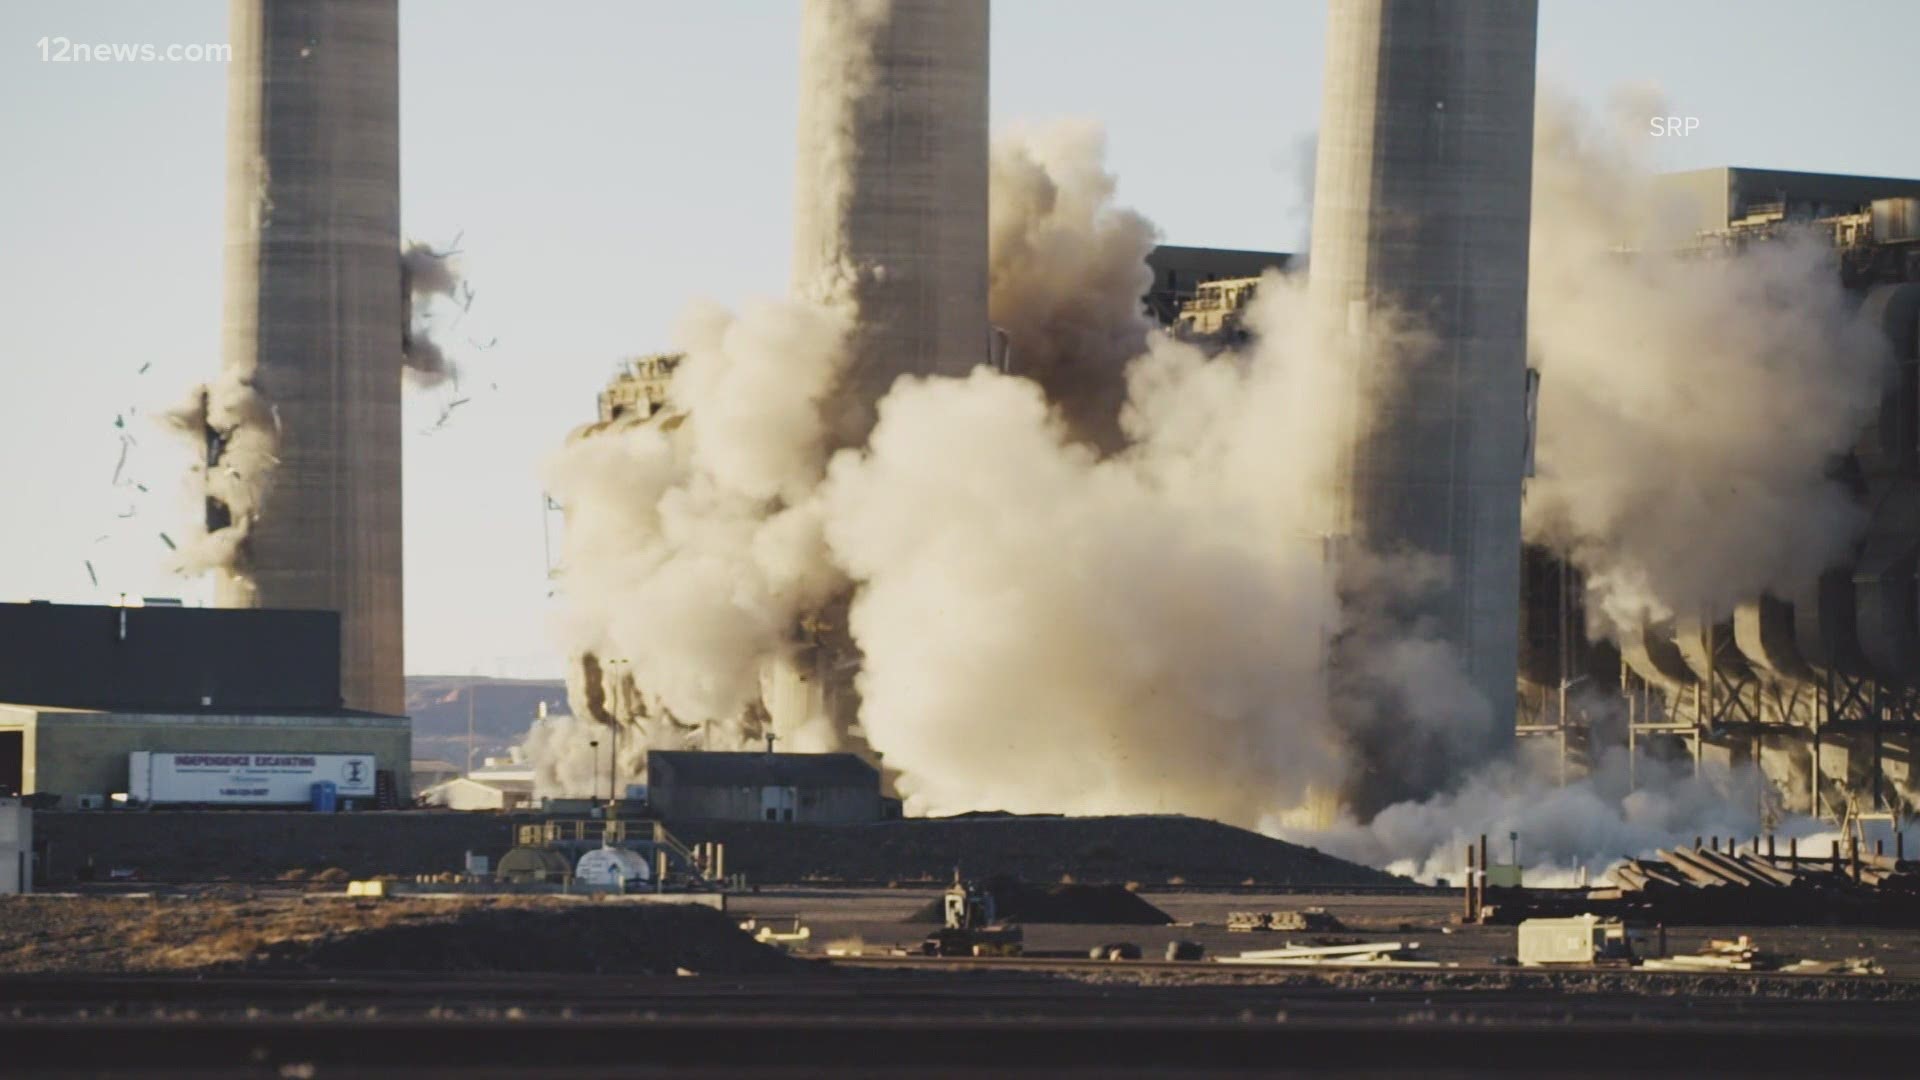 SRP has released drone footage showing an up-close angle of the demolition of the Navajo Generating Station near Page, AZ.